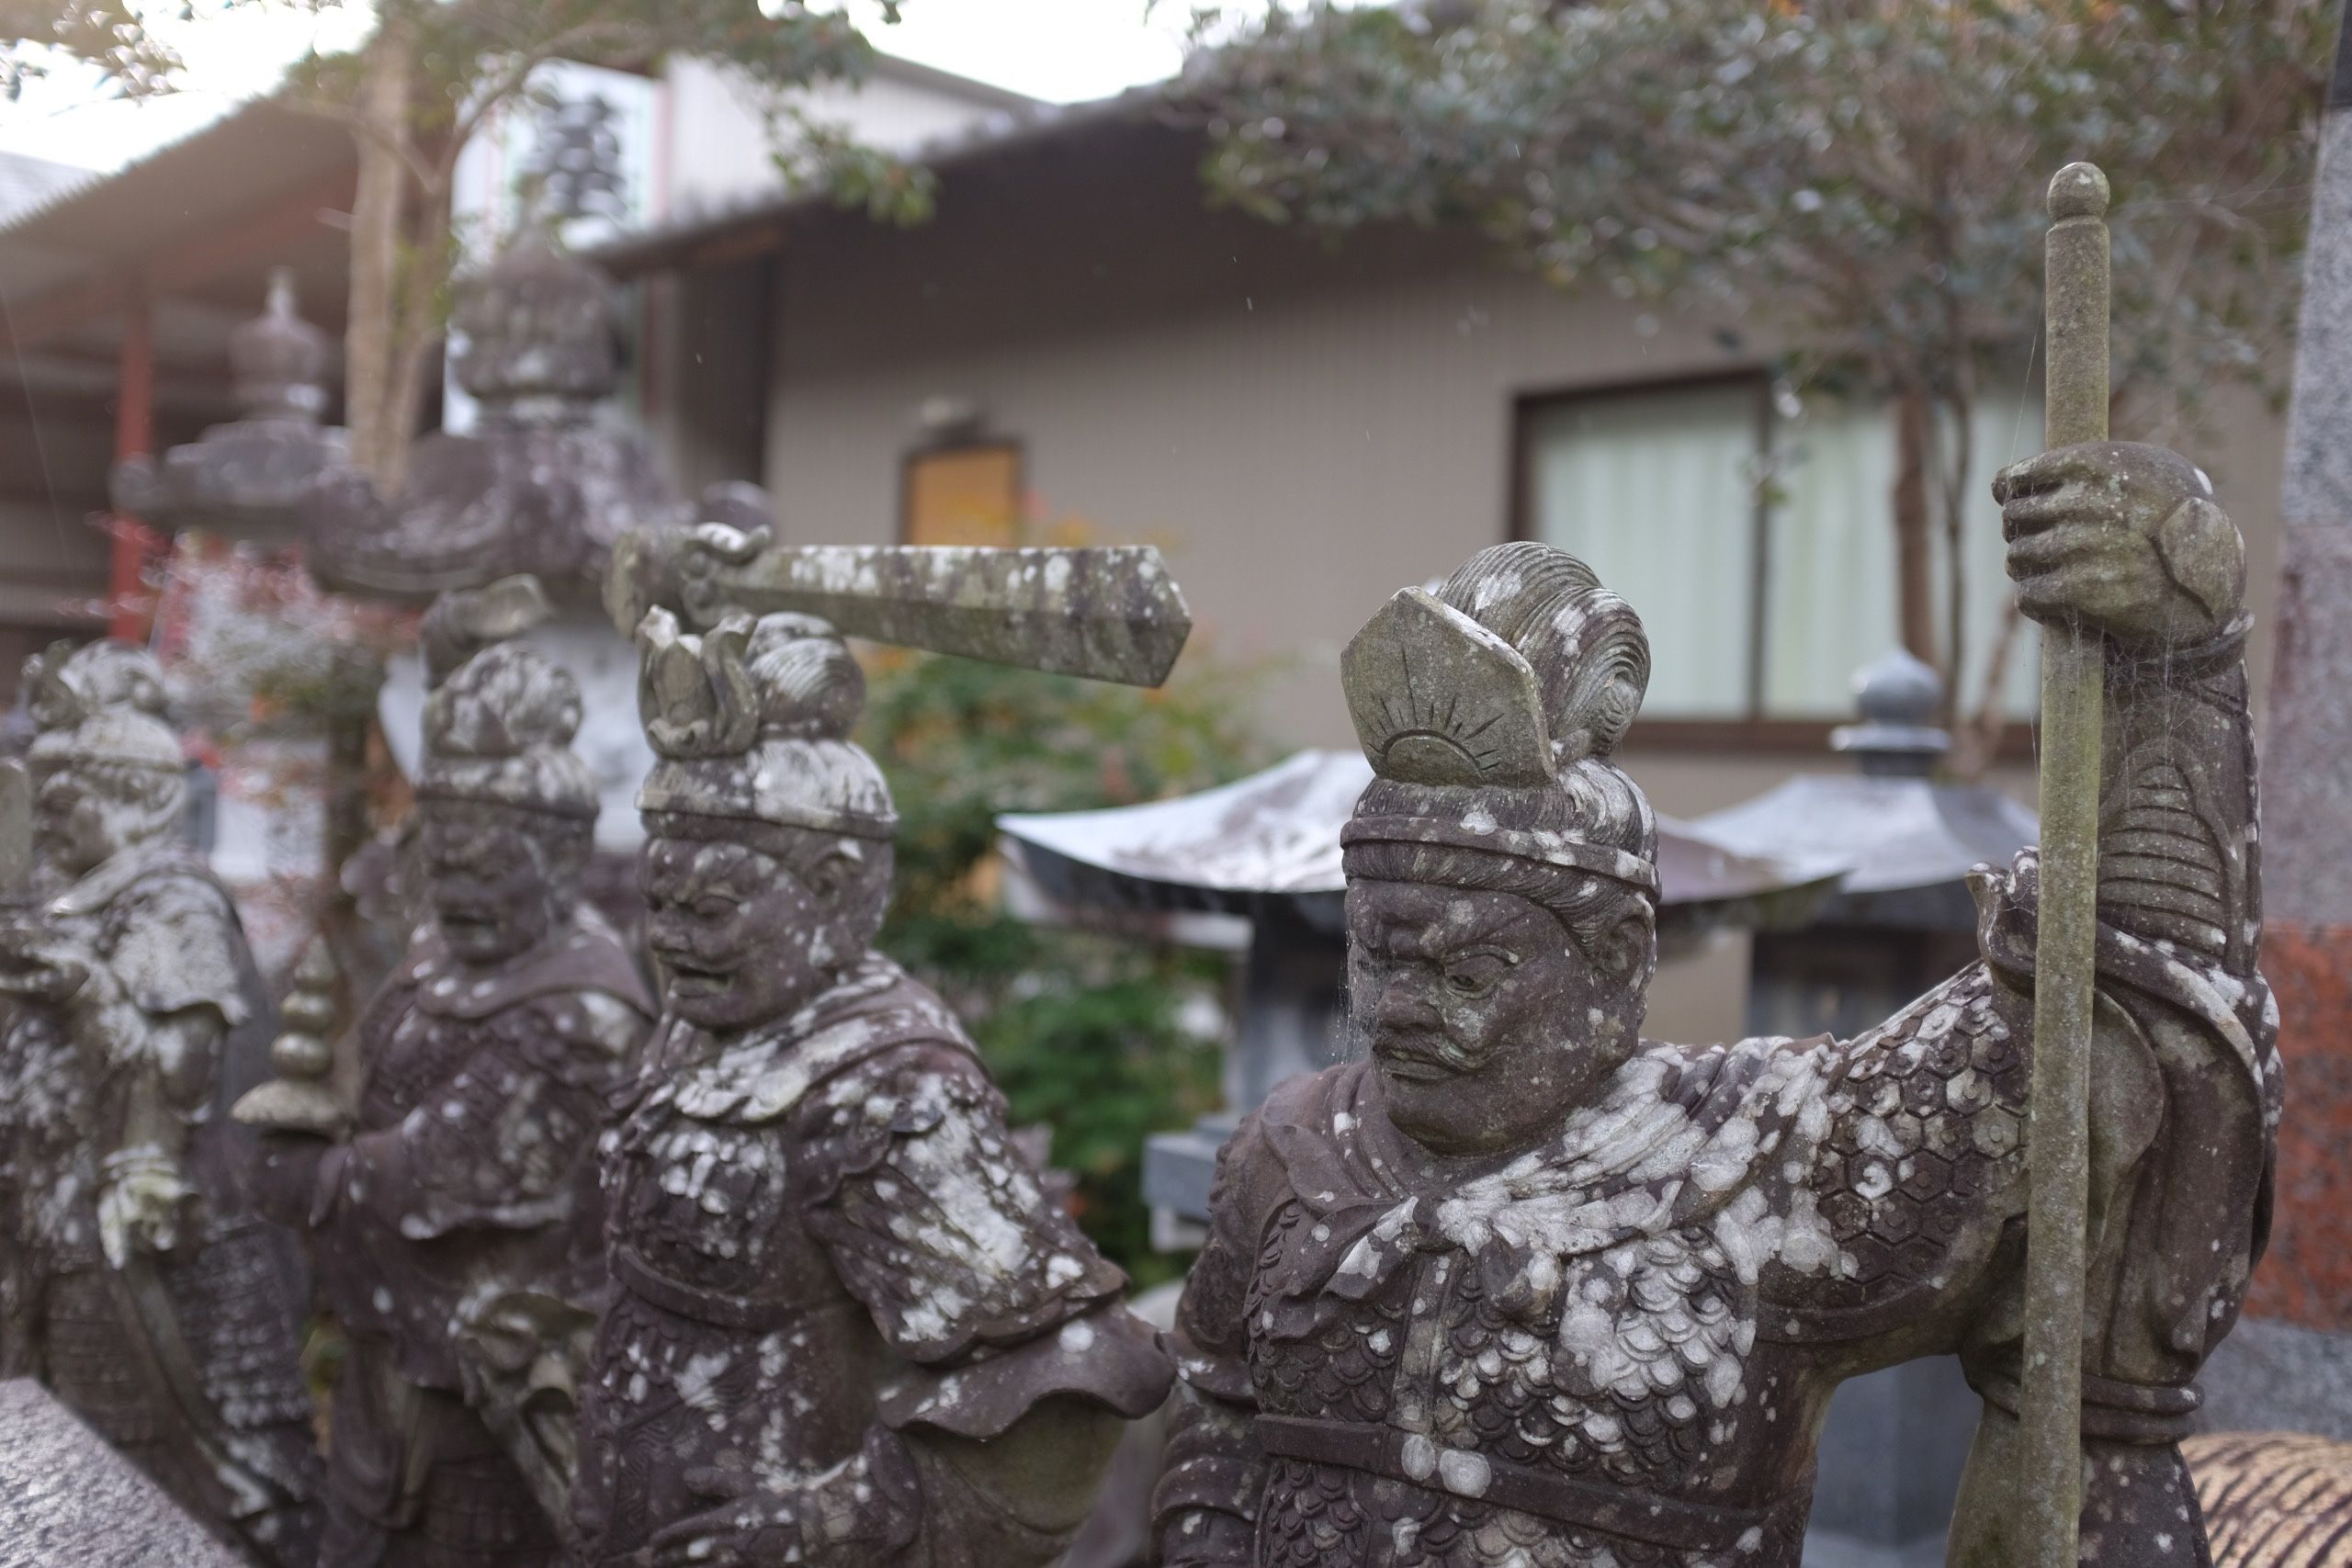 Carved stone warriors covered in lichen.